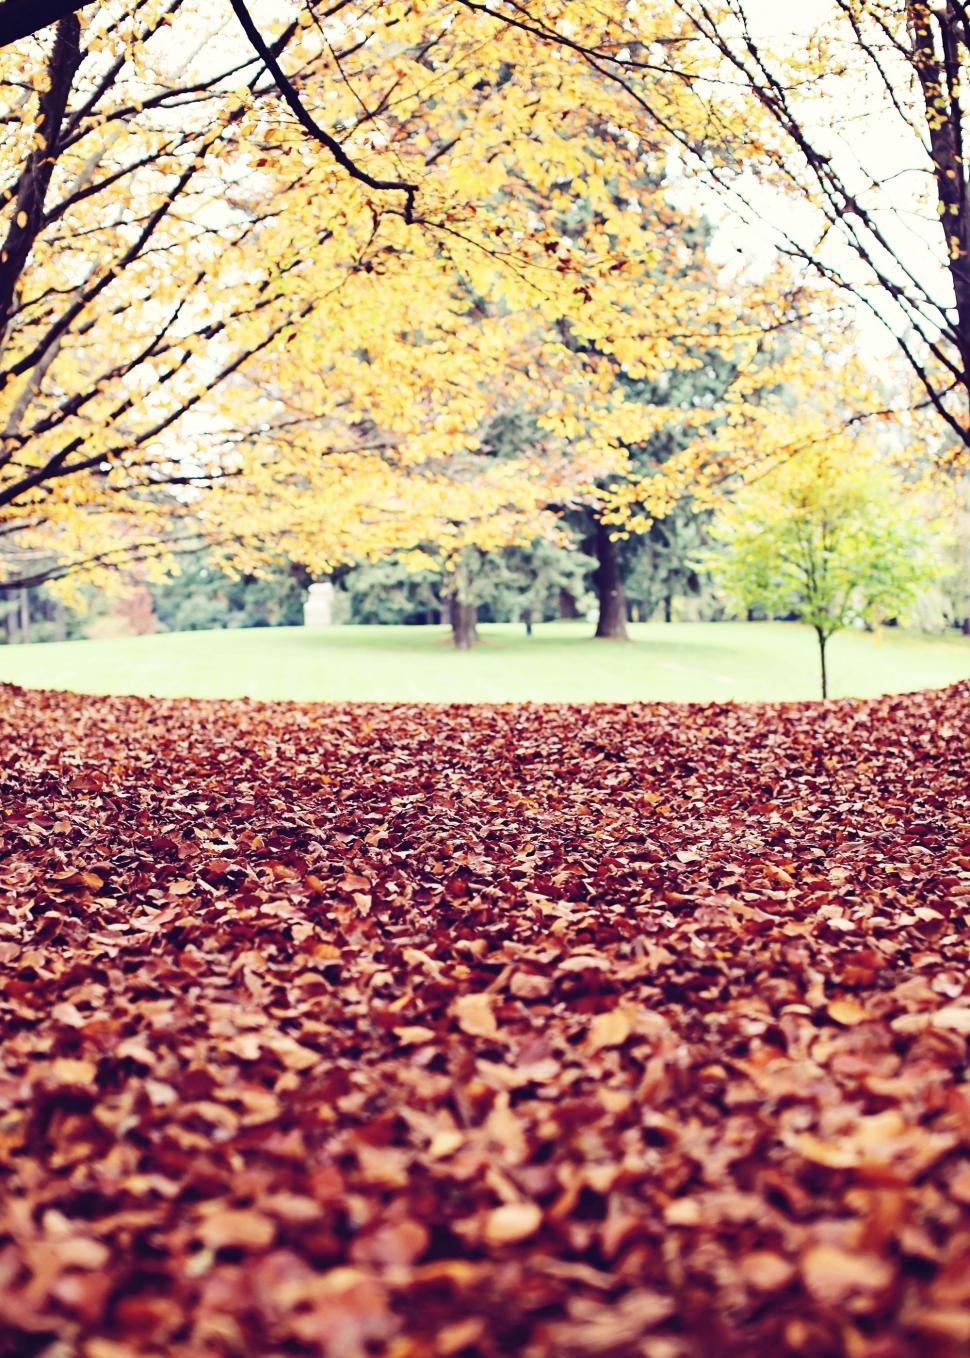 Free Image of Leaf-Covered Trees in a Park 